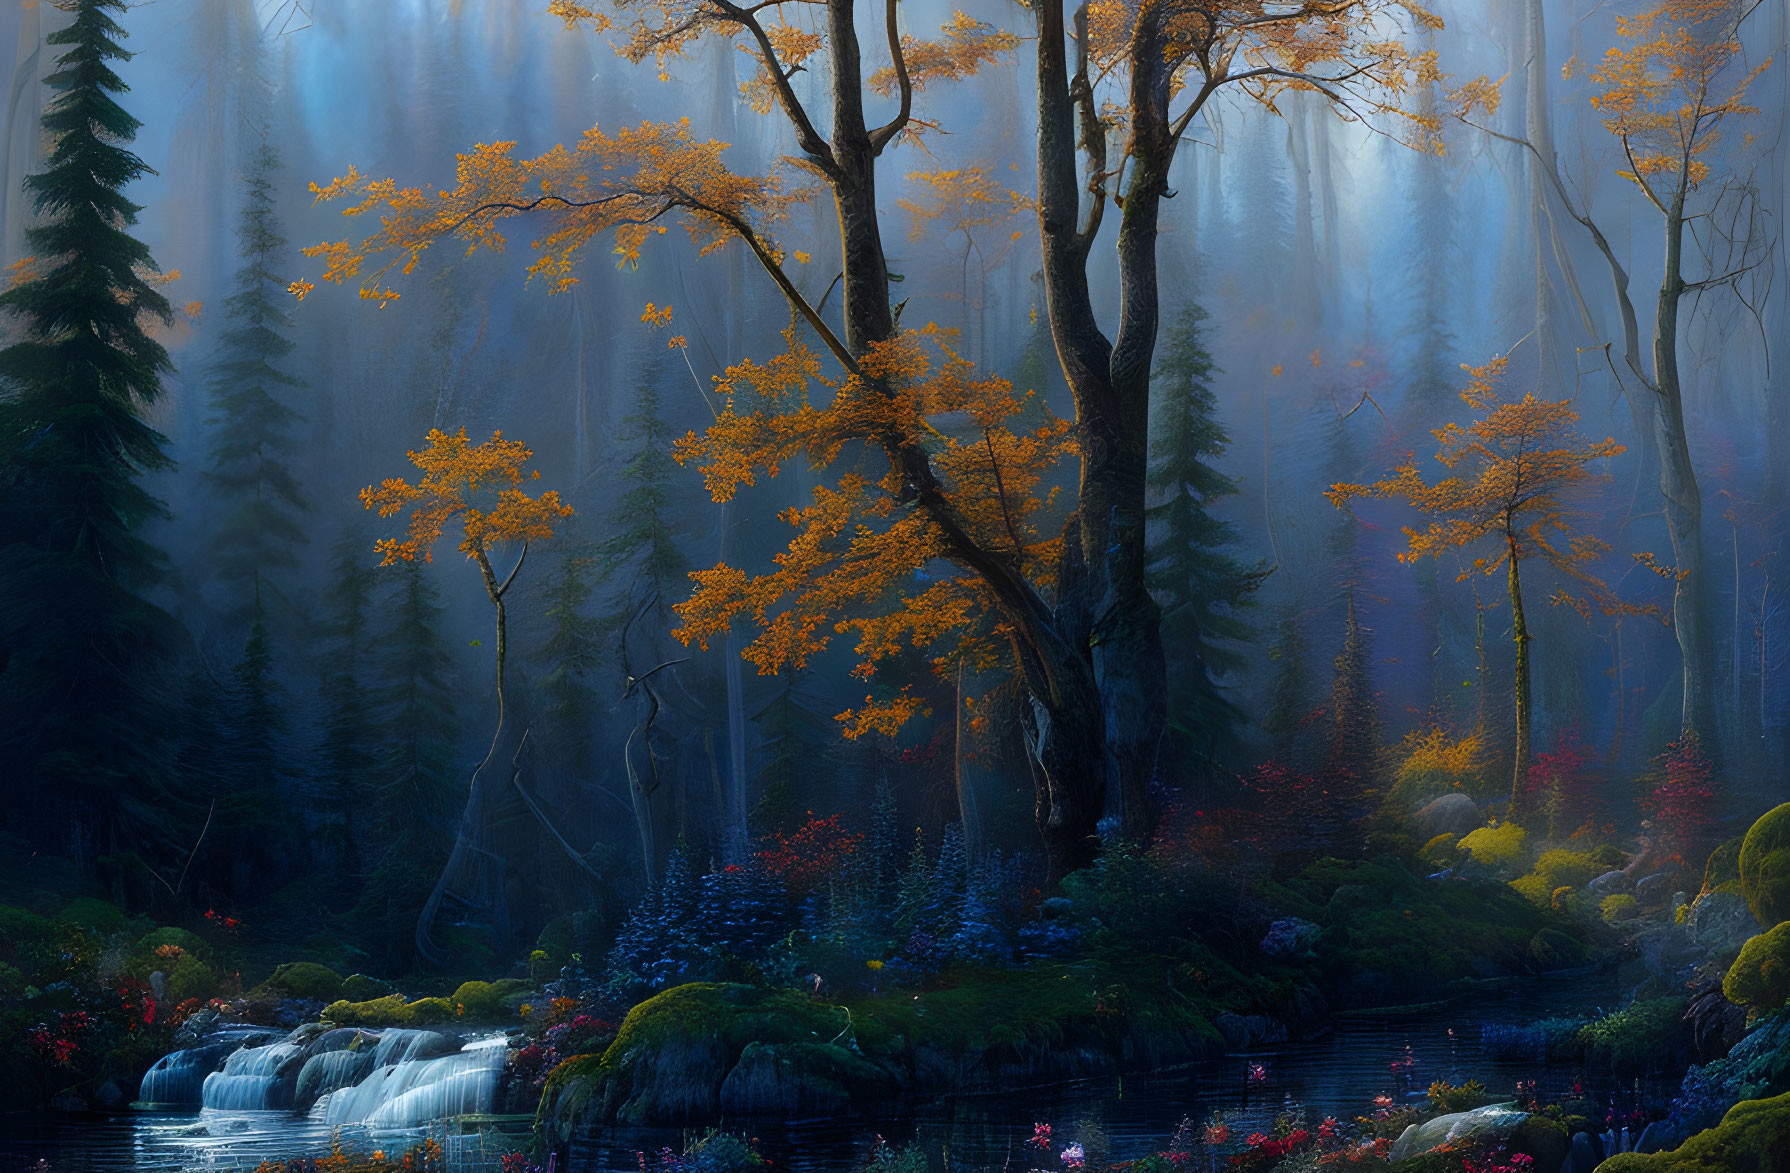 Tranquil forest scene with mist, stream, flowers, and vibrant orange leaves